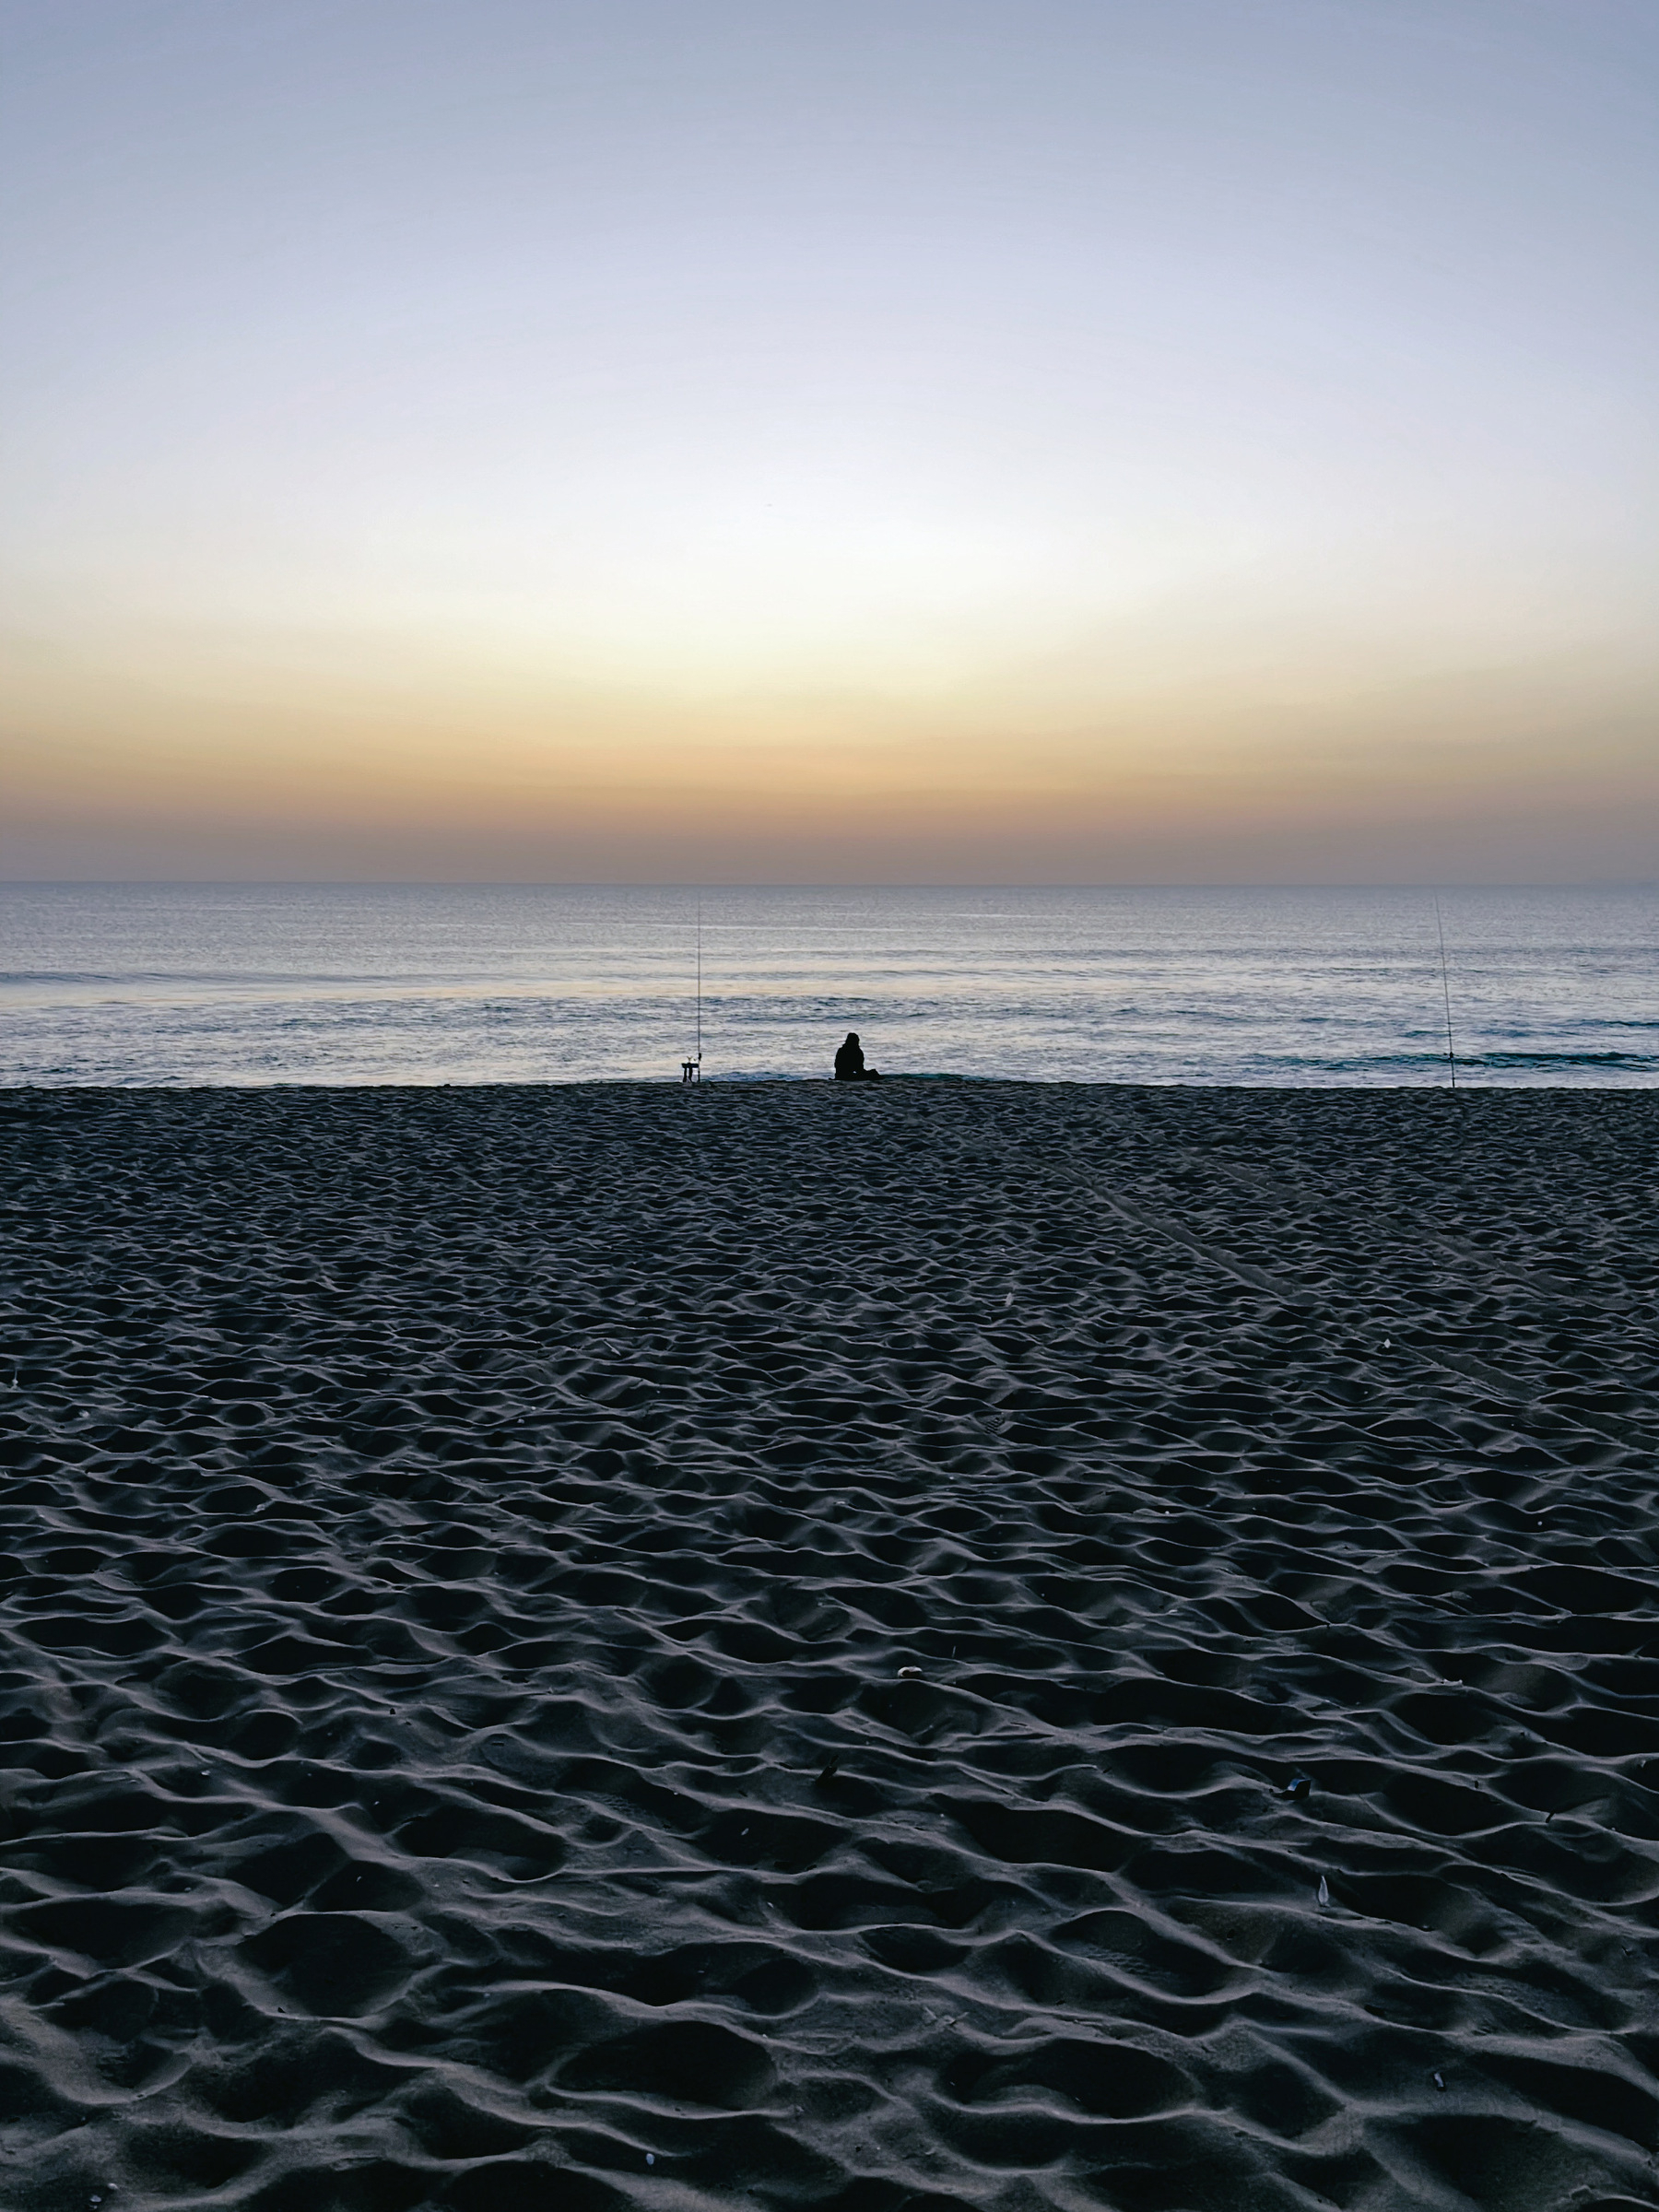 A lone fisherman on the beach in Comporta, Portugal, at sunset